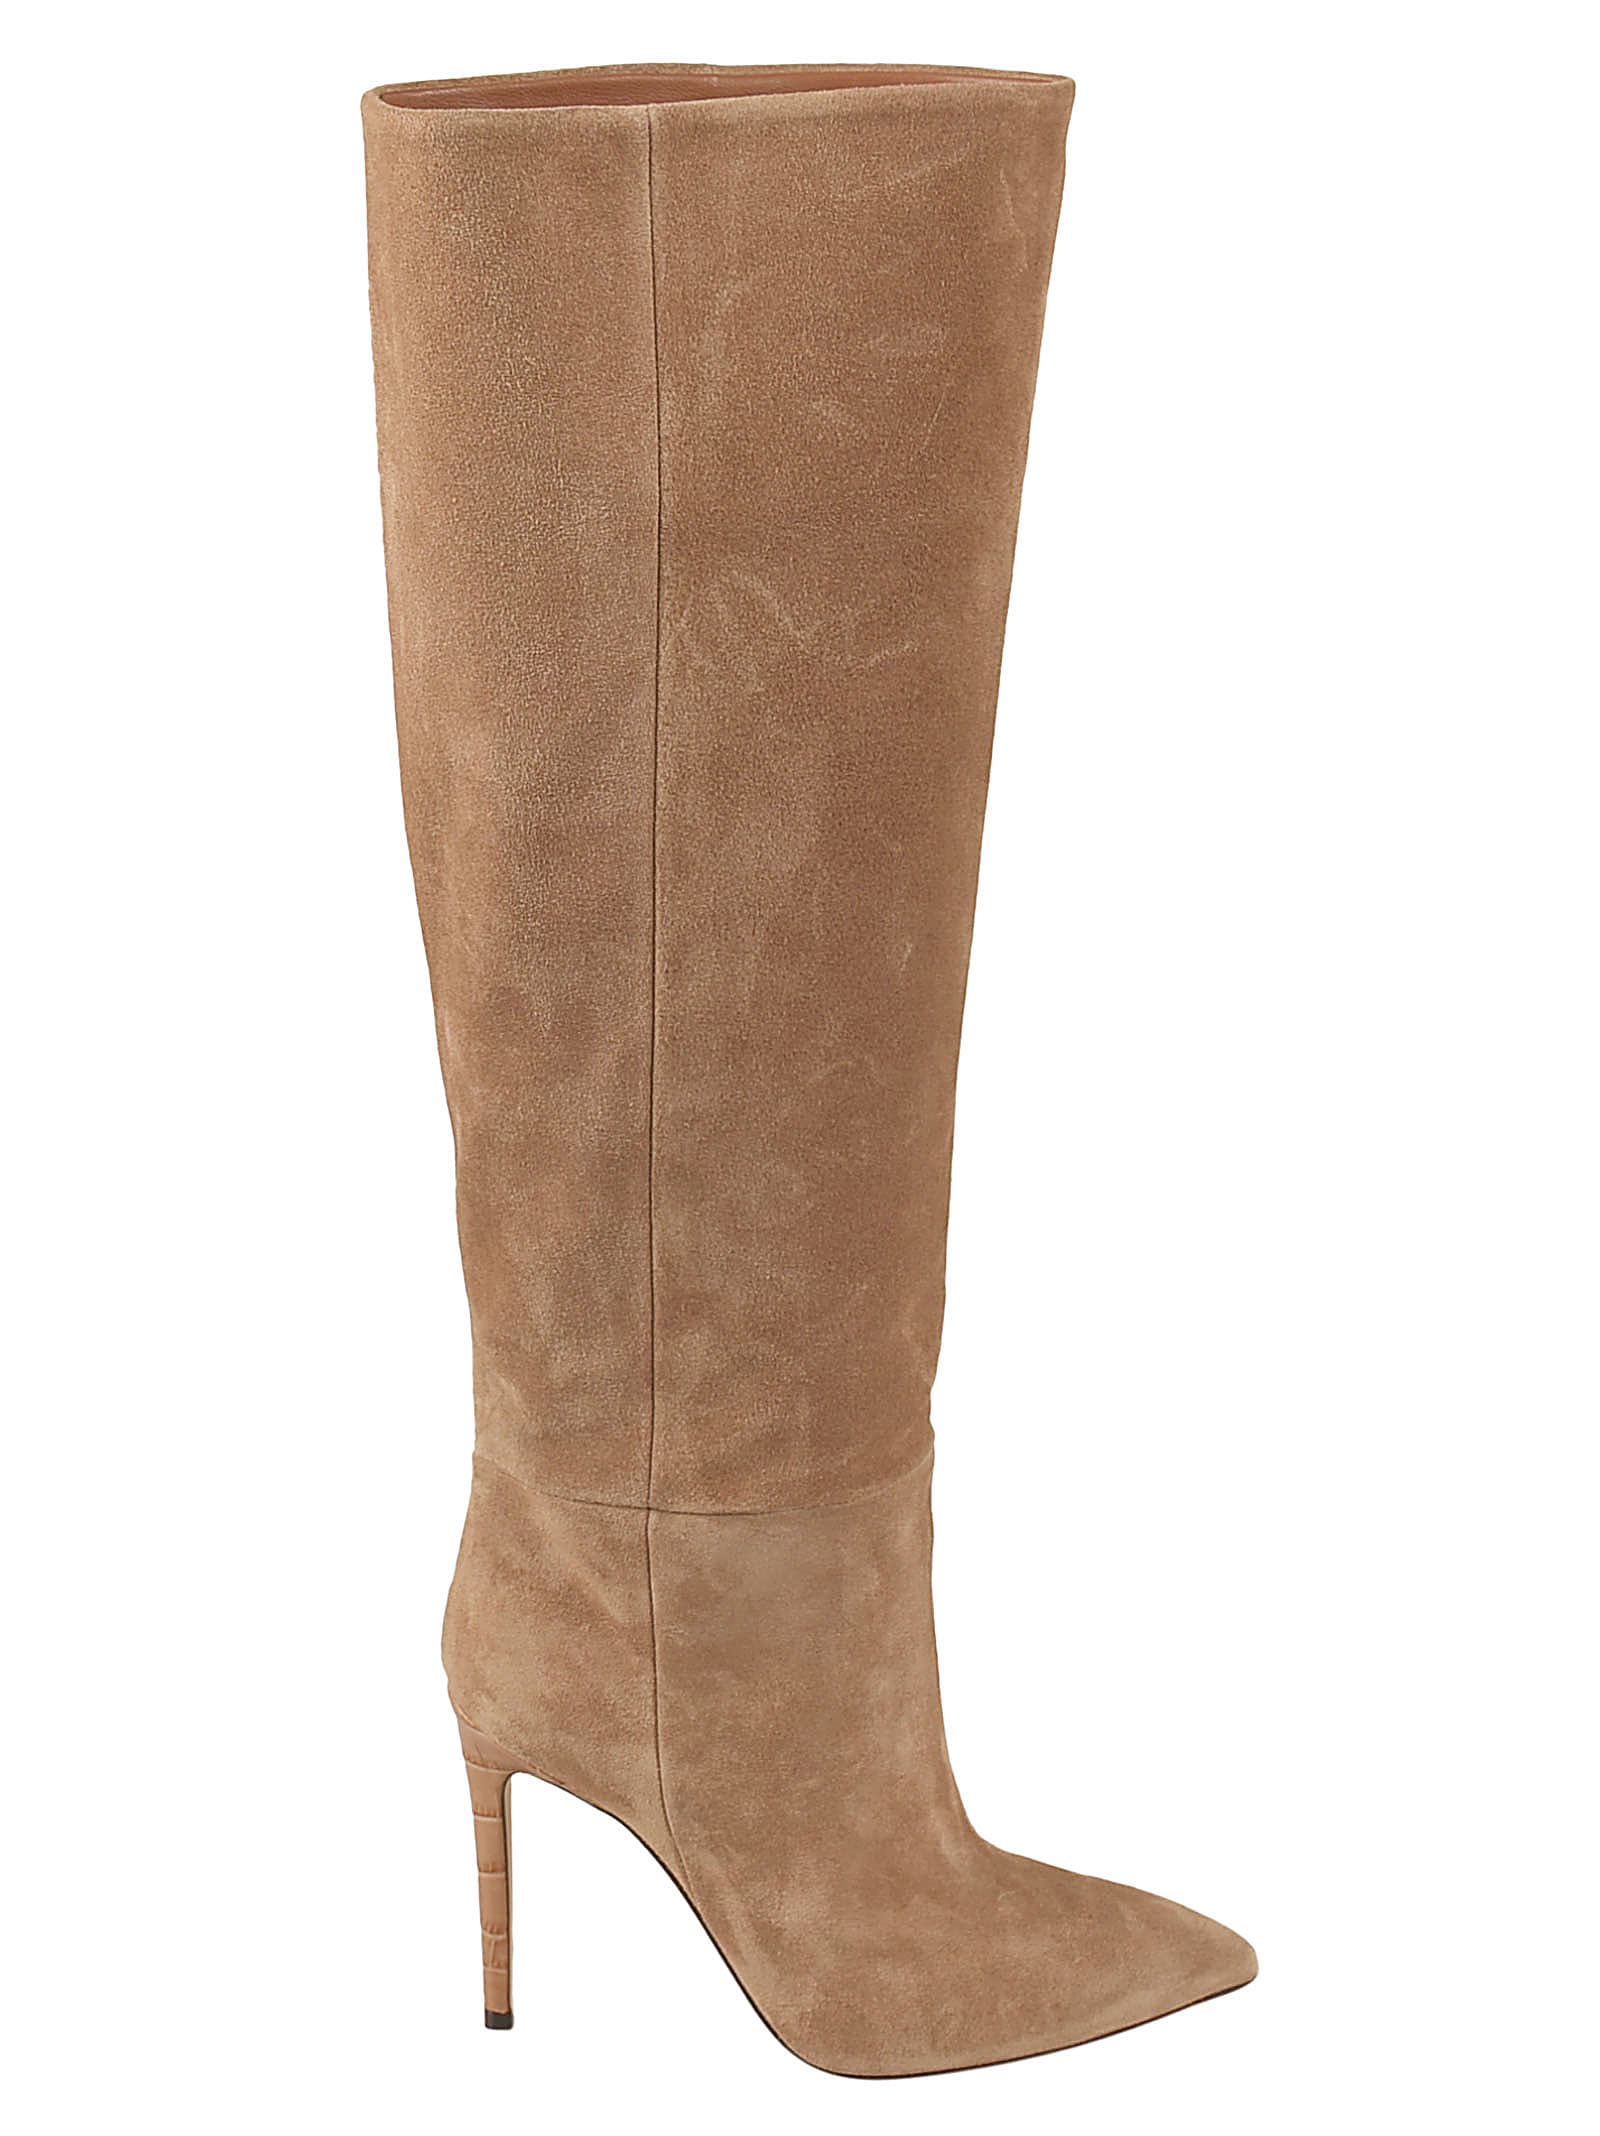 Paris Texas Pointed Toe Boots